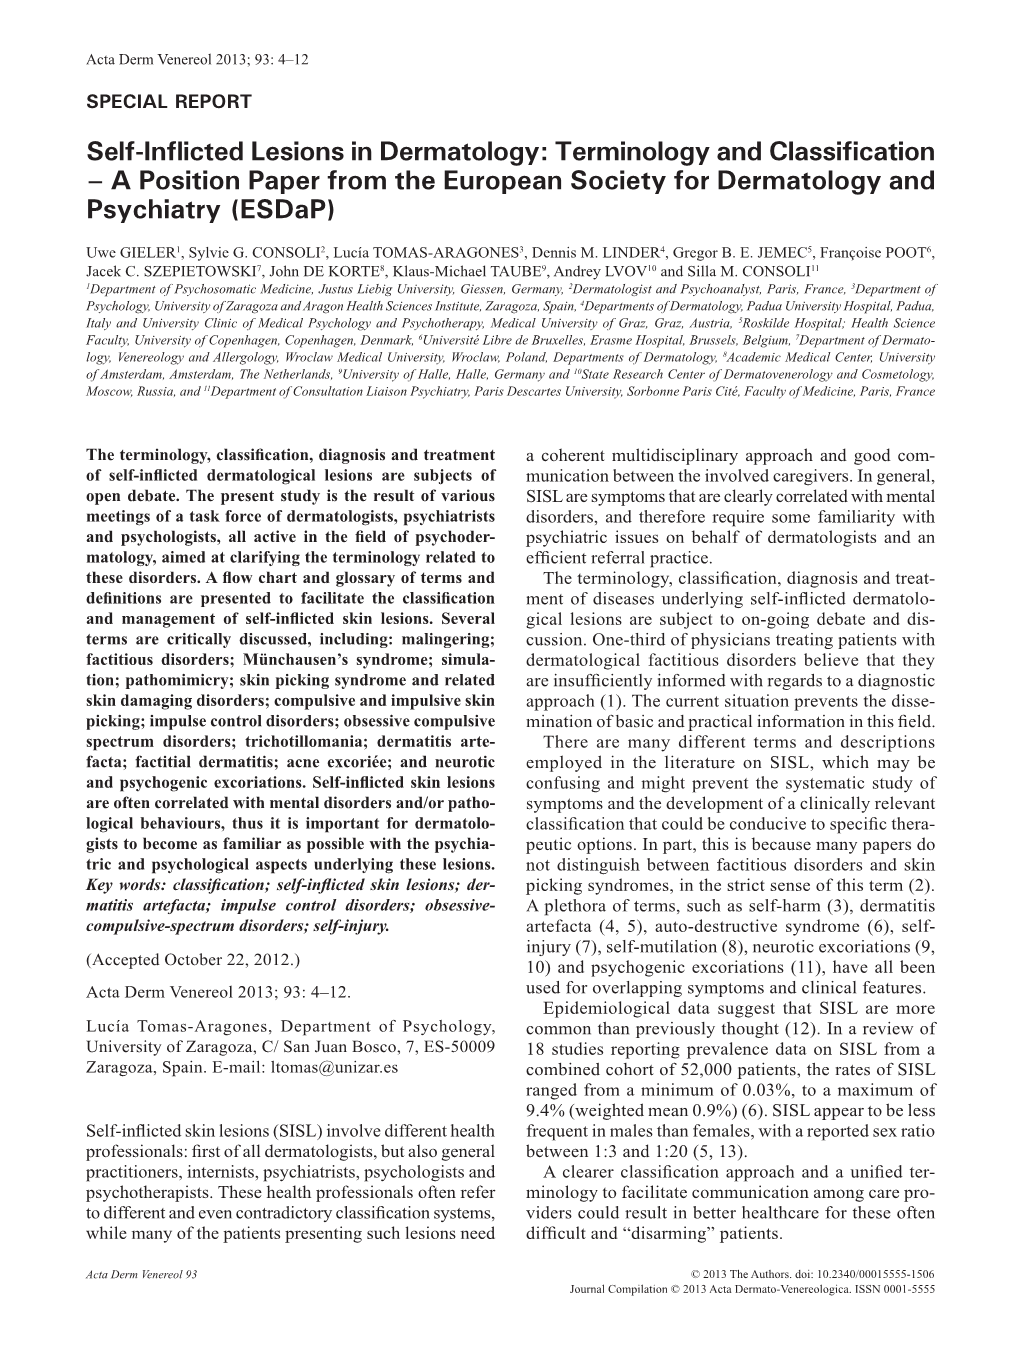 Self-Inflicted Lesions in Dermatology: Terminology and Classification – a Position Paper from the European Society for Dermatology and Psychiatry (Esdap)